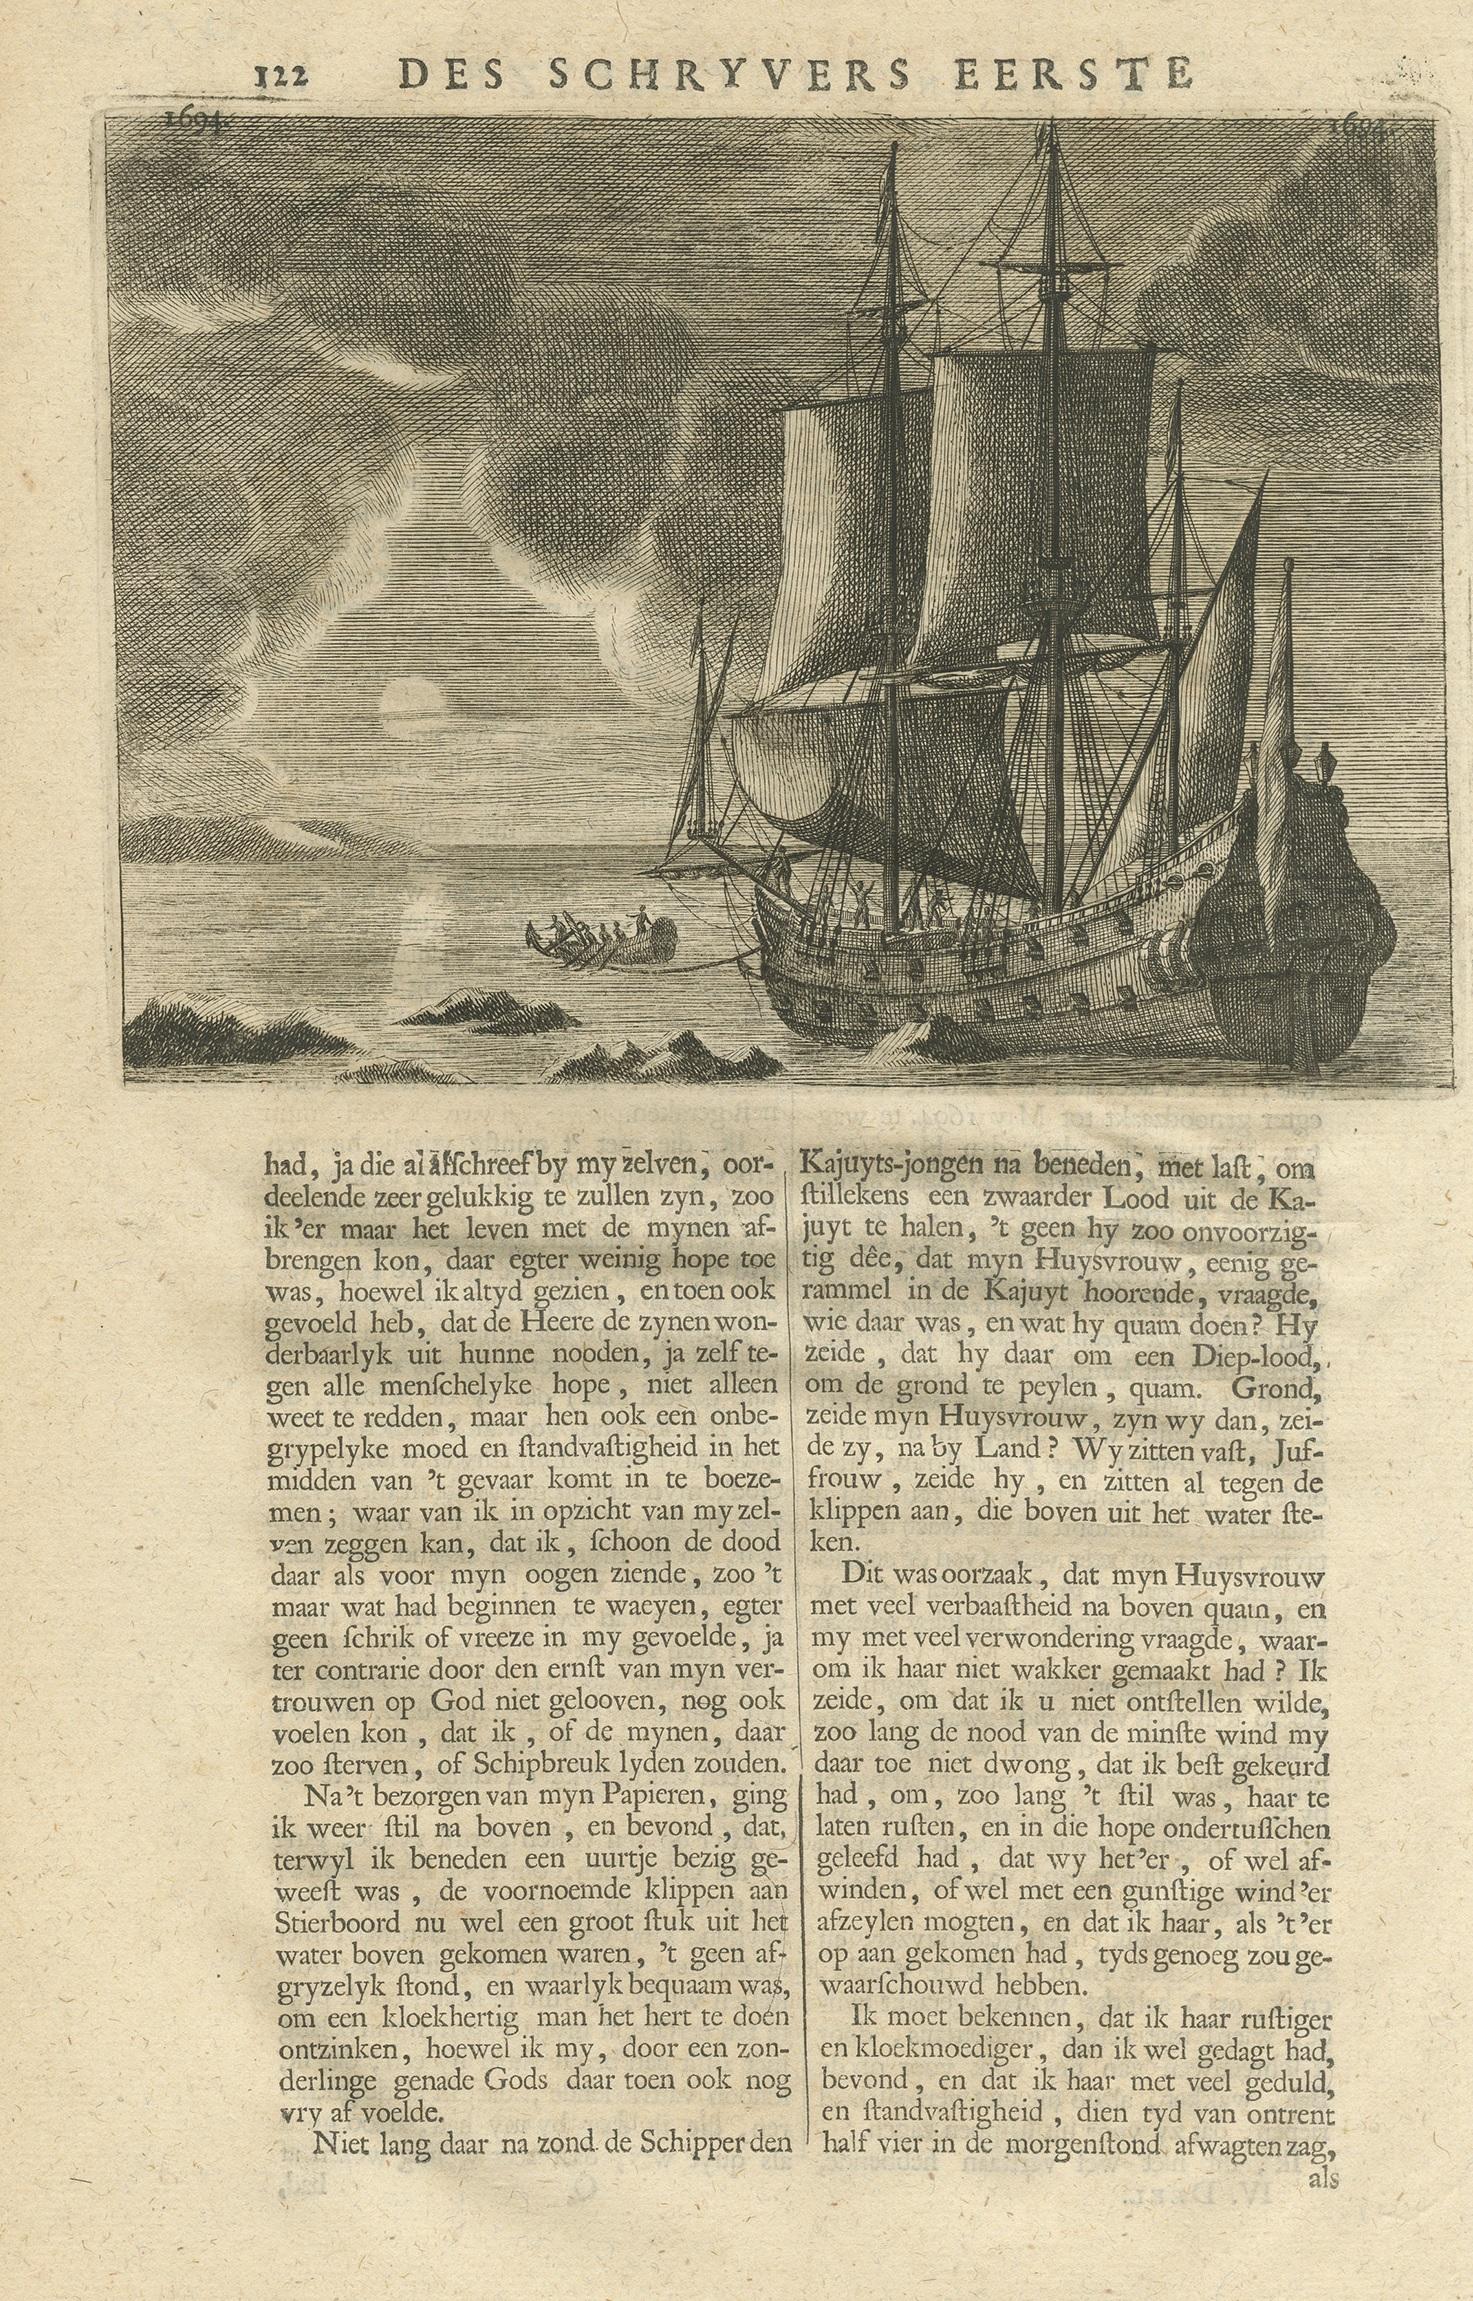 Untitled print of a ship setting sail. Text on verso. This print originates from 'Oud en Nieuw Oost-Indiën' by F. Valentijn.